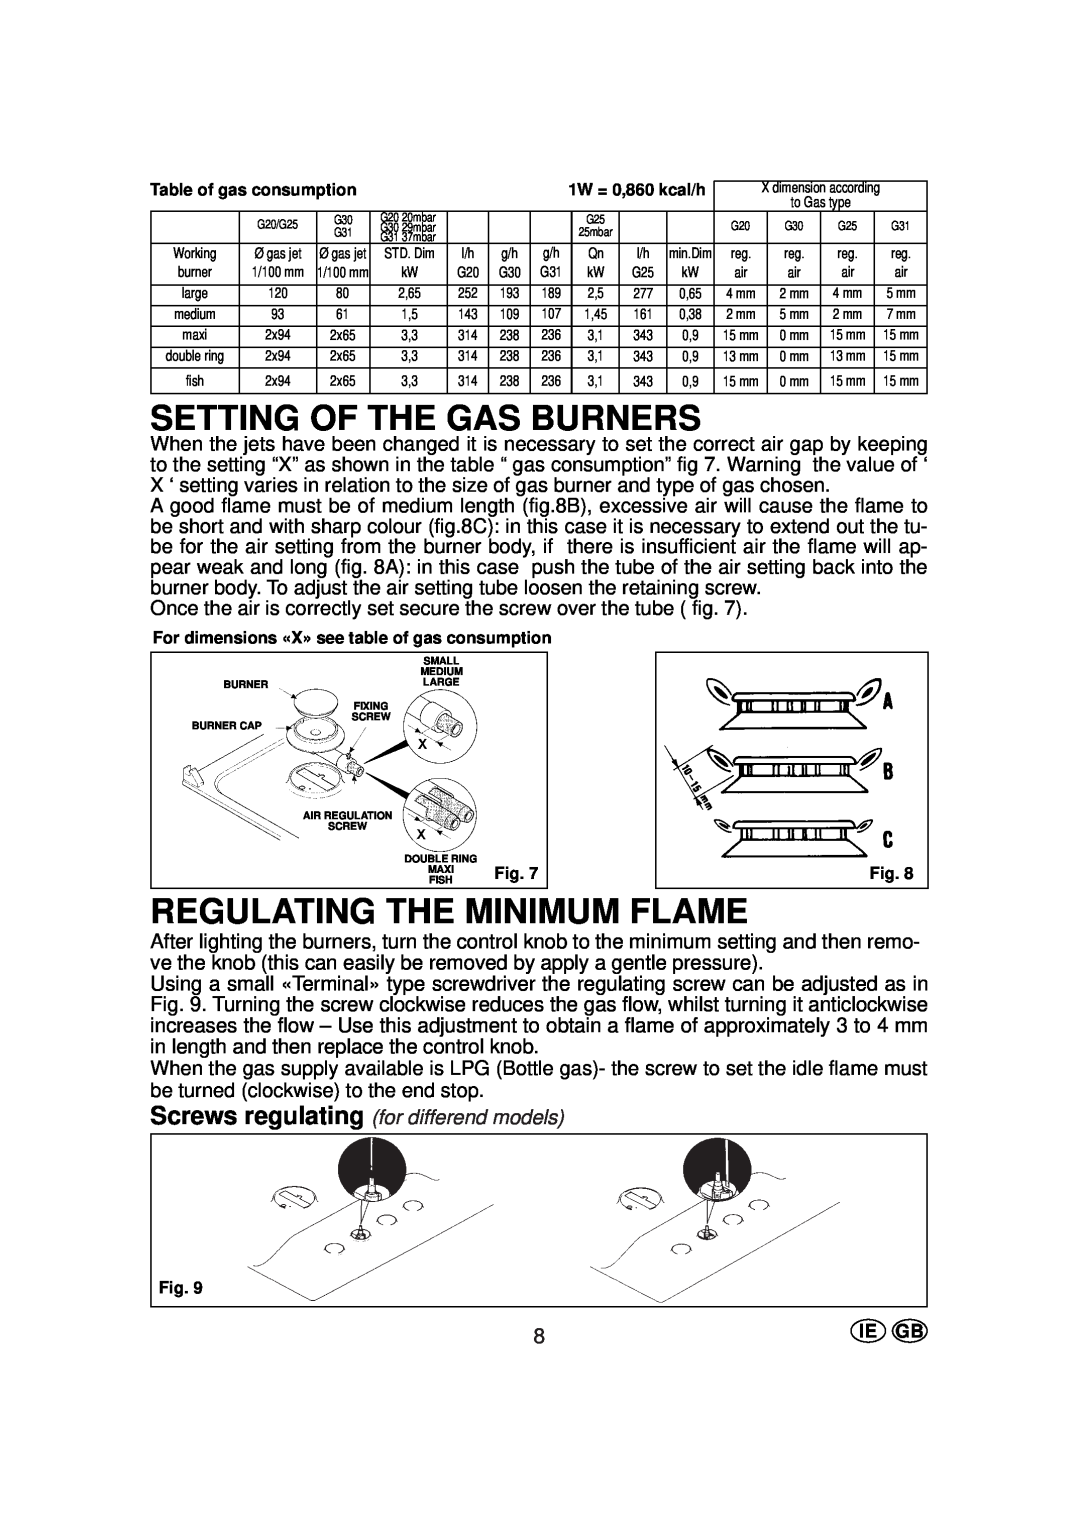 Hoover HGH 640 B manual Setting Of The Gas Burners, Regulating The Minimum Flame, Screws regulating for differend models 